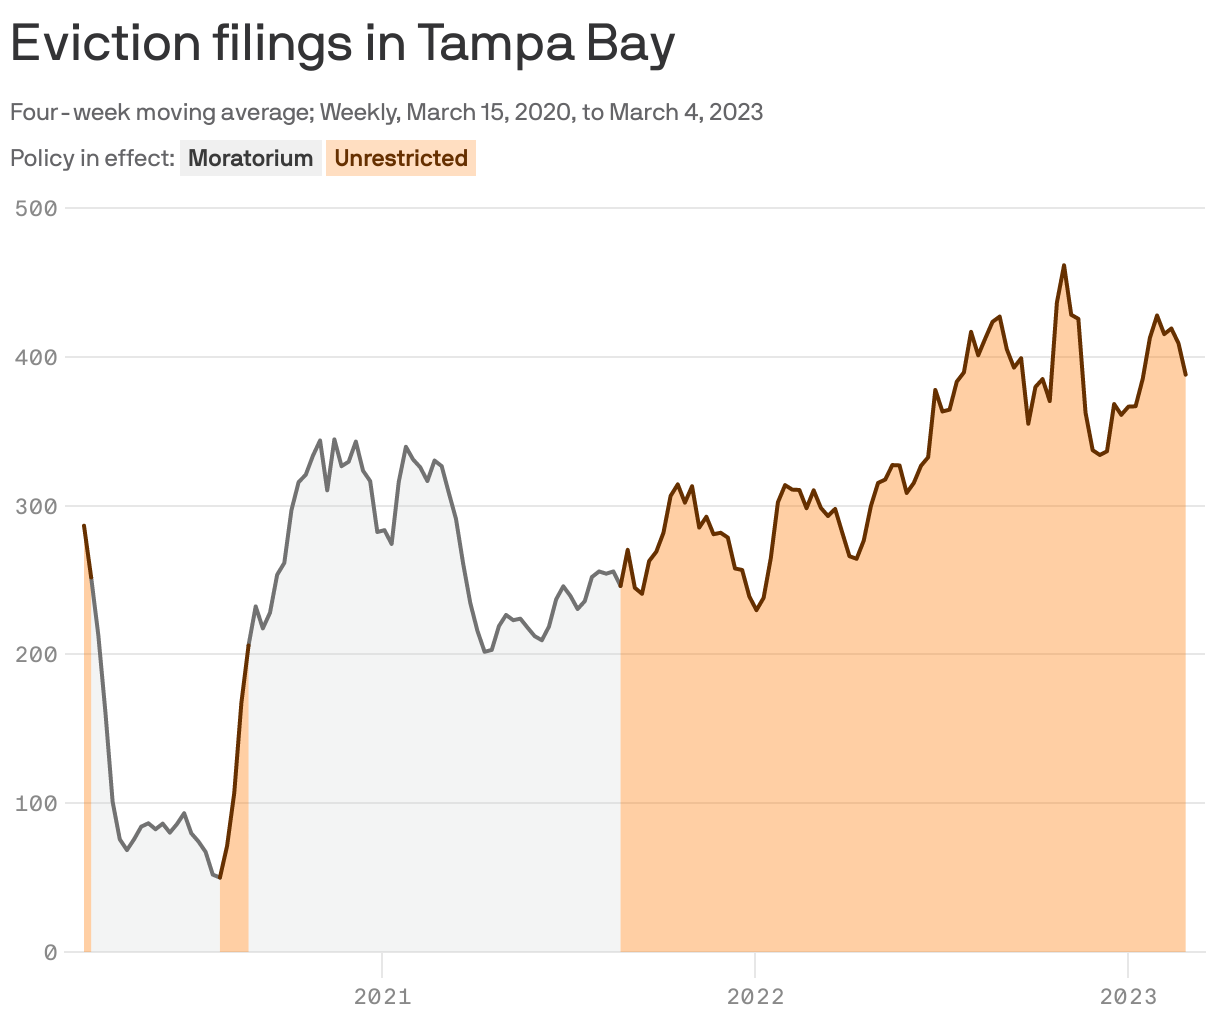 Eviction filings in Tampa Bay